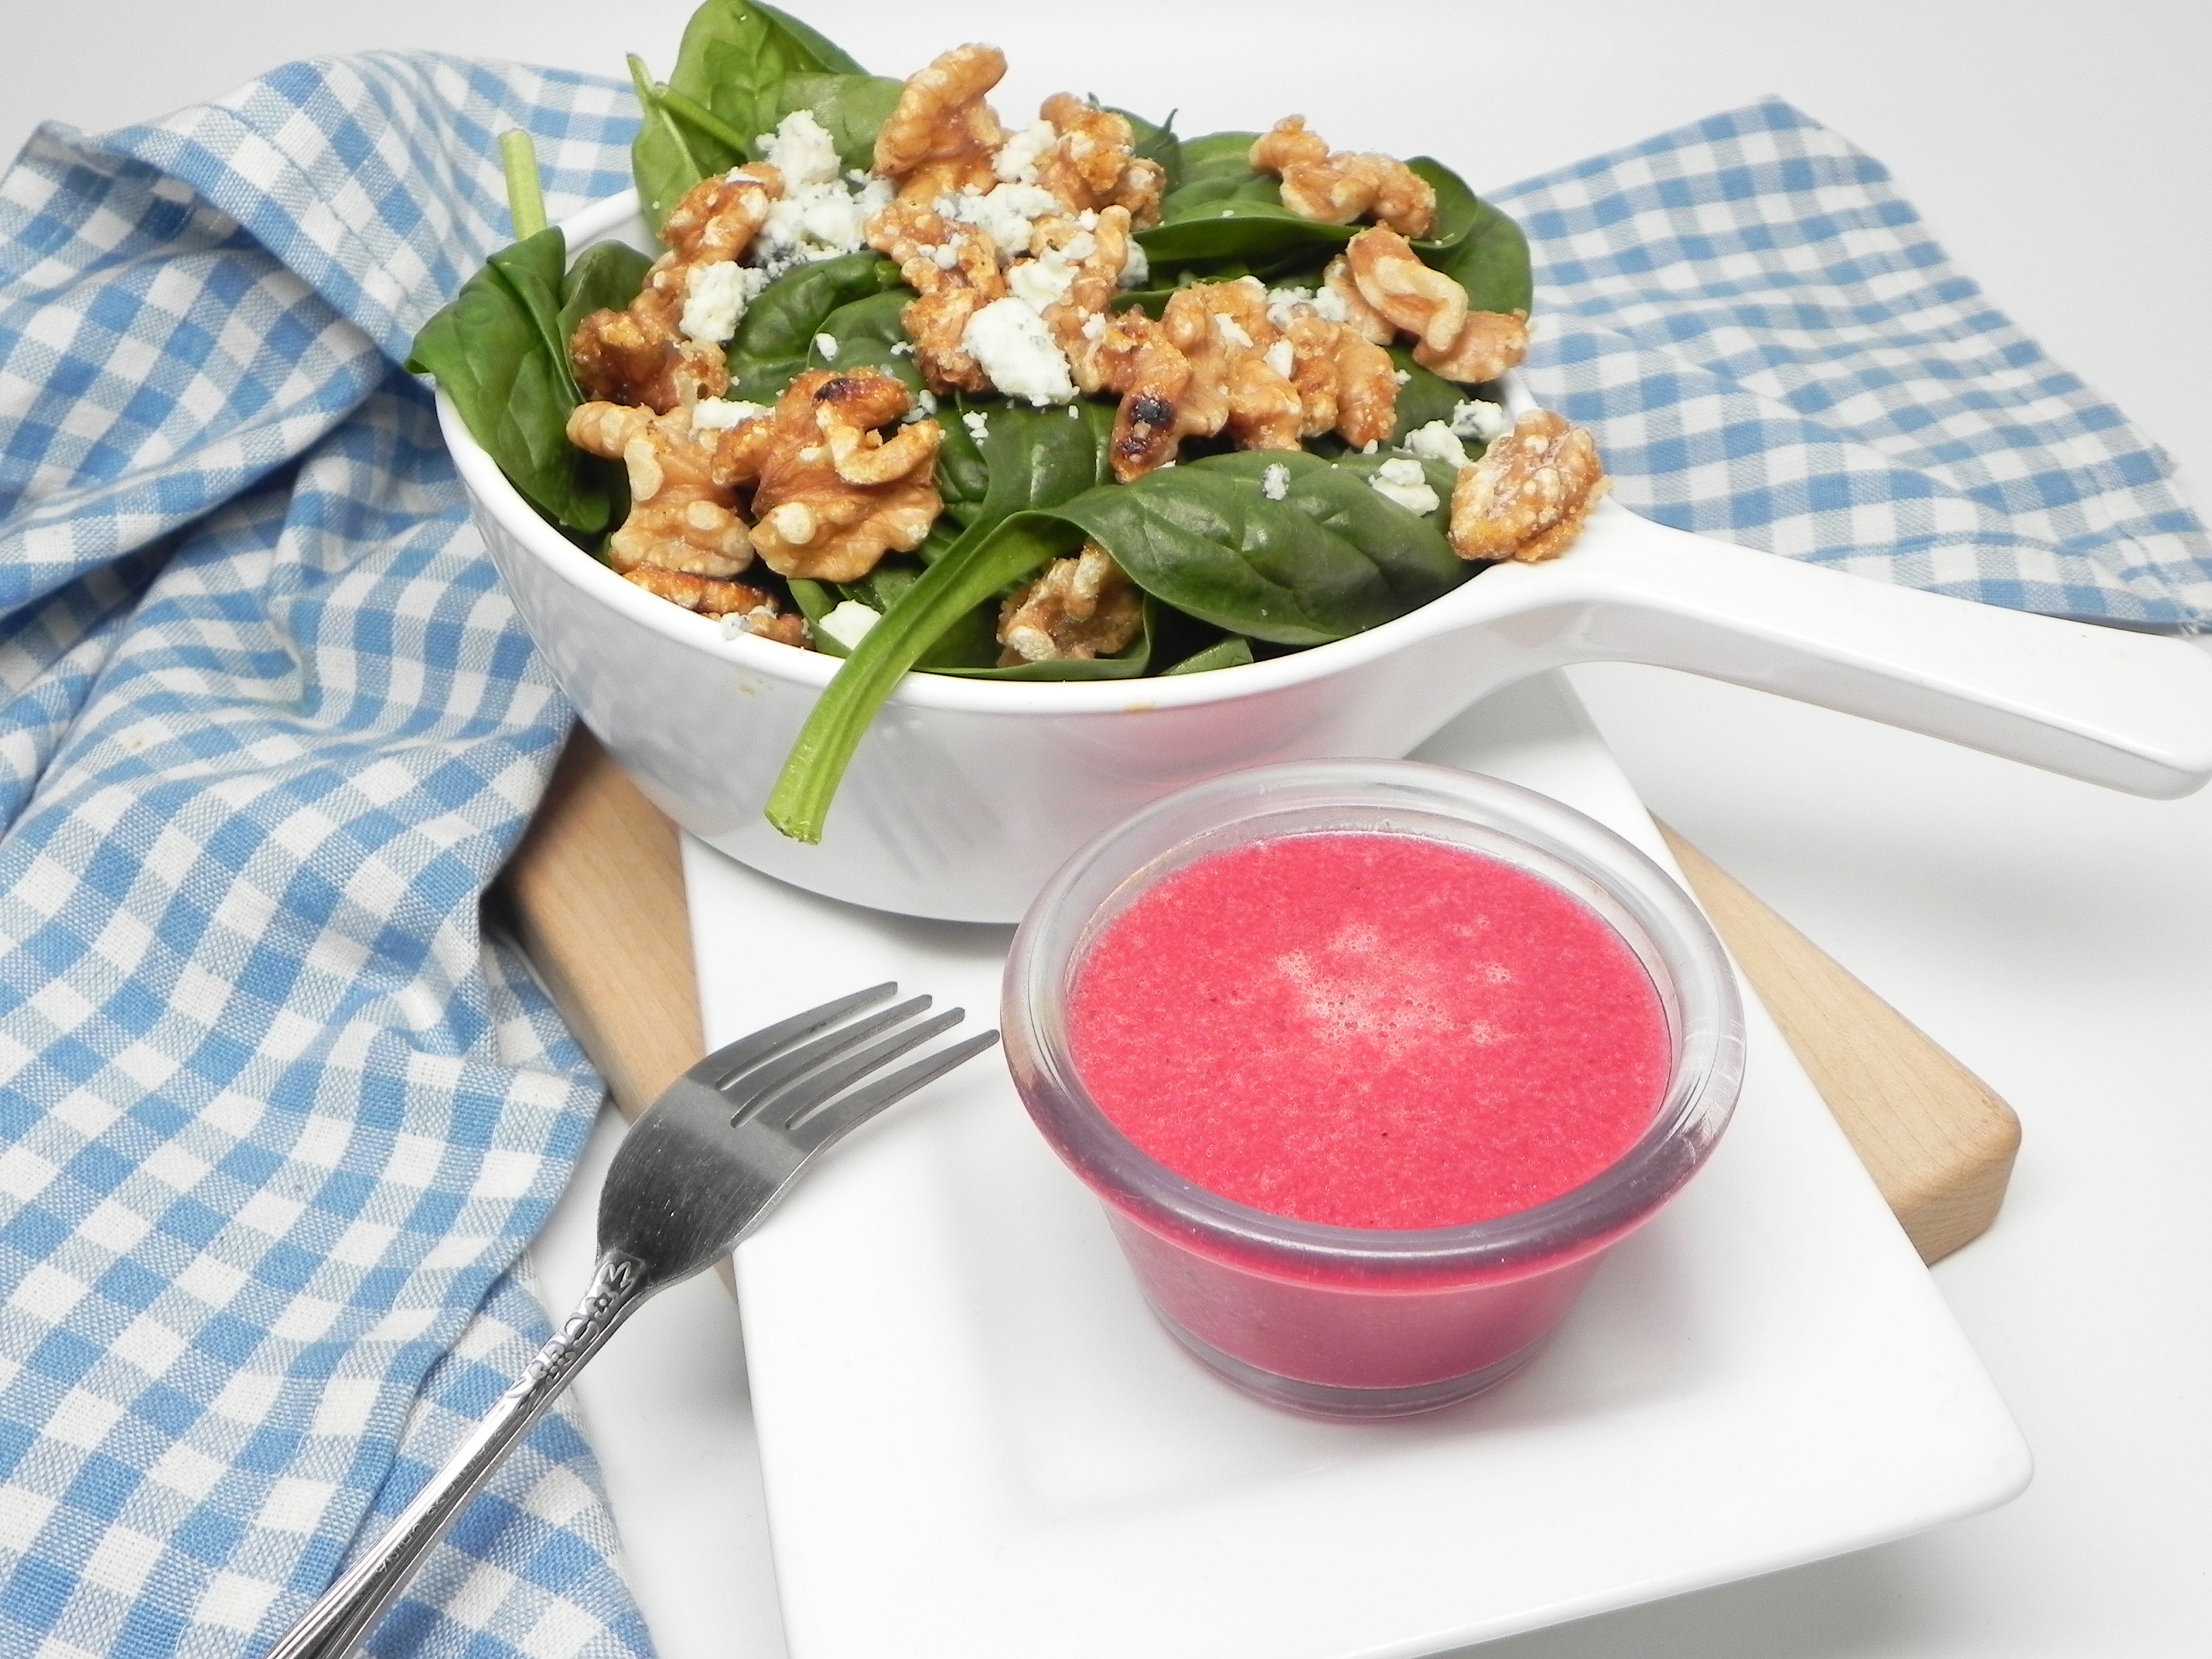 Spinach and Goat Cheese Salad with Beetroot Vinaigrette